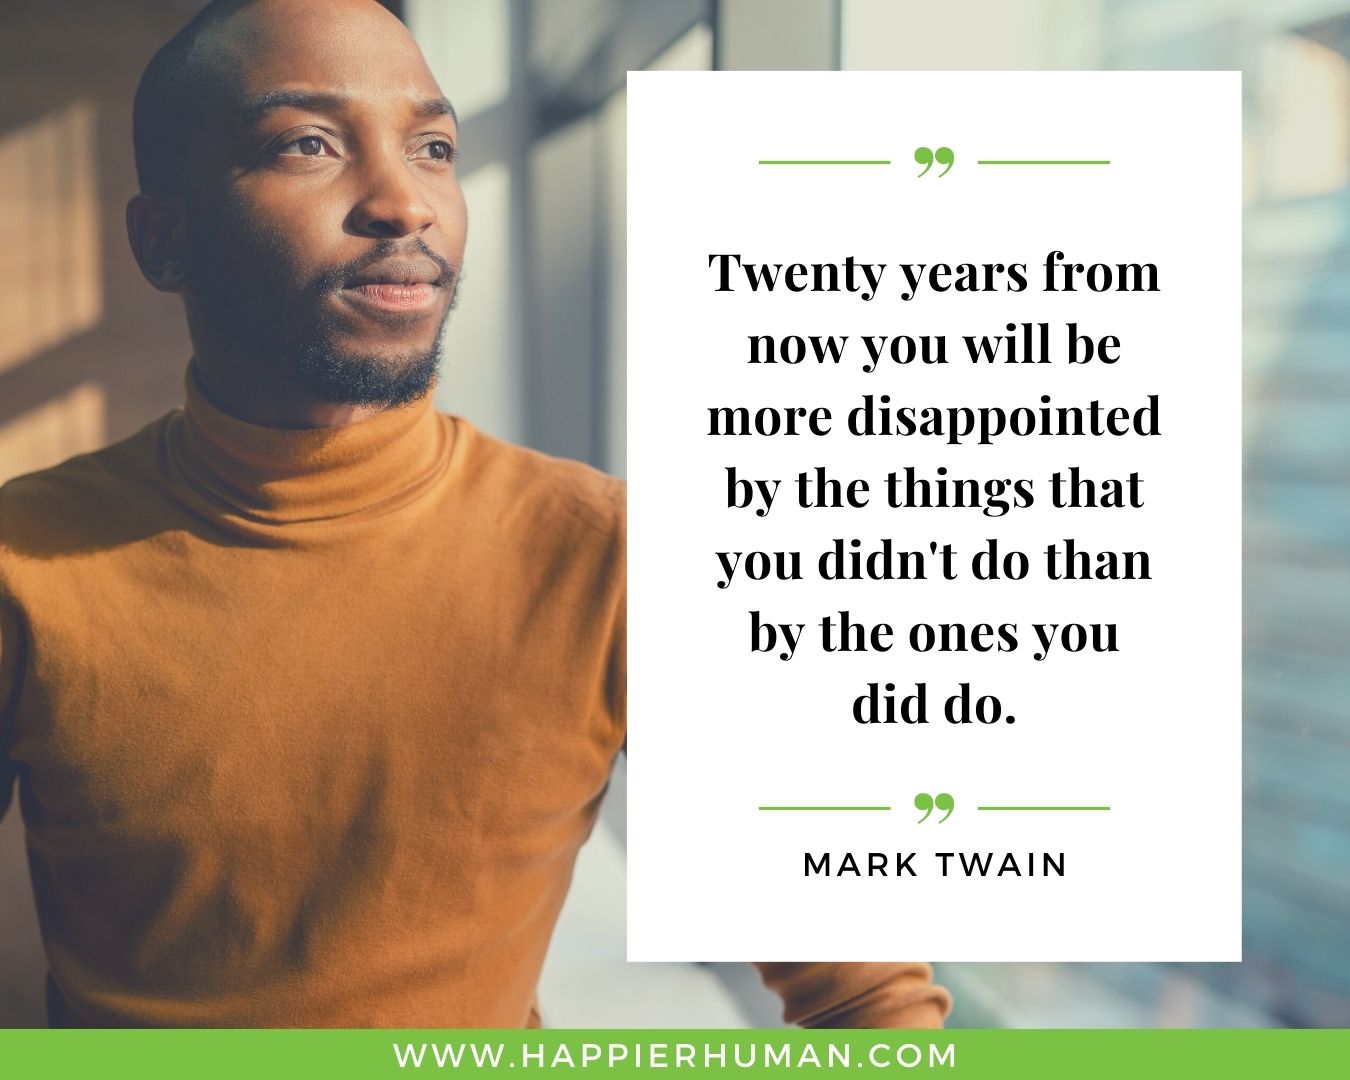 Overthinking Quotes - “Twenty years from now you will be more disappointed by the things that you didn't do than by the ones you did do.” - Mark Twain